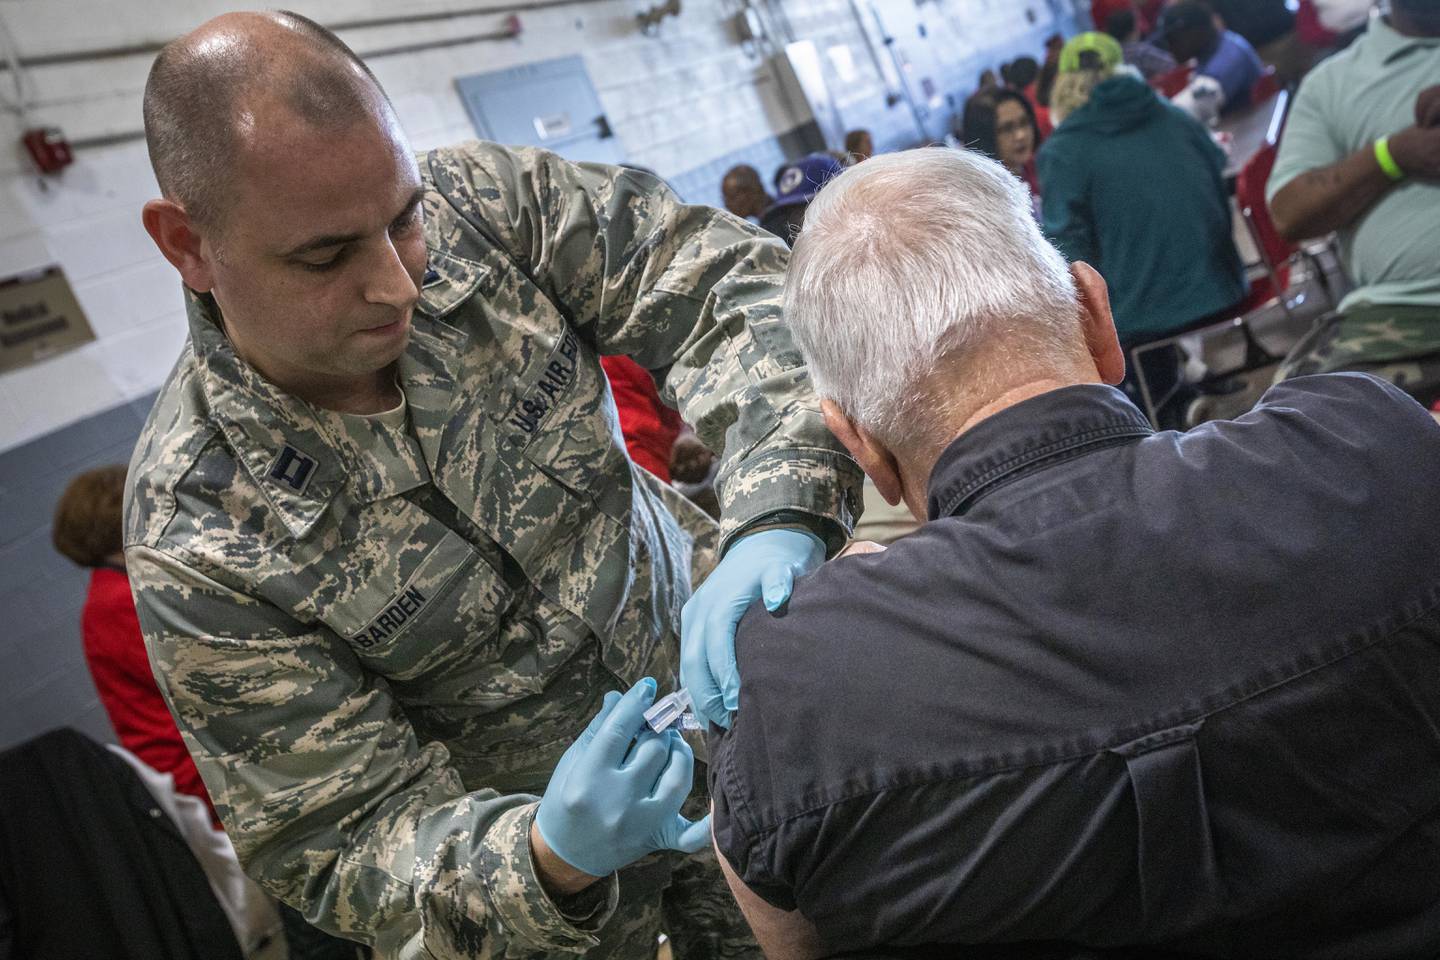 Air Force Capt. Kerwin Barden, chief nurse, 177th Fighter Wing, New Jersey Air National Guard, gives an unhoused veteran a flu shot in Cherry Hill, New Jersey, in 2019.